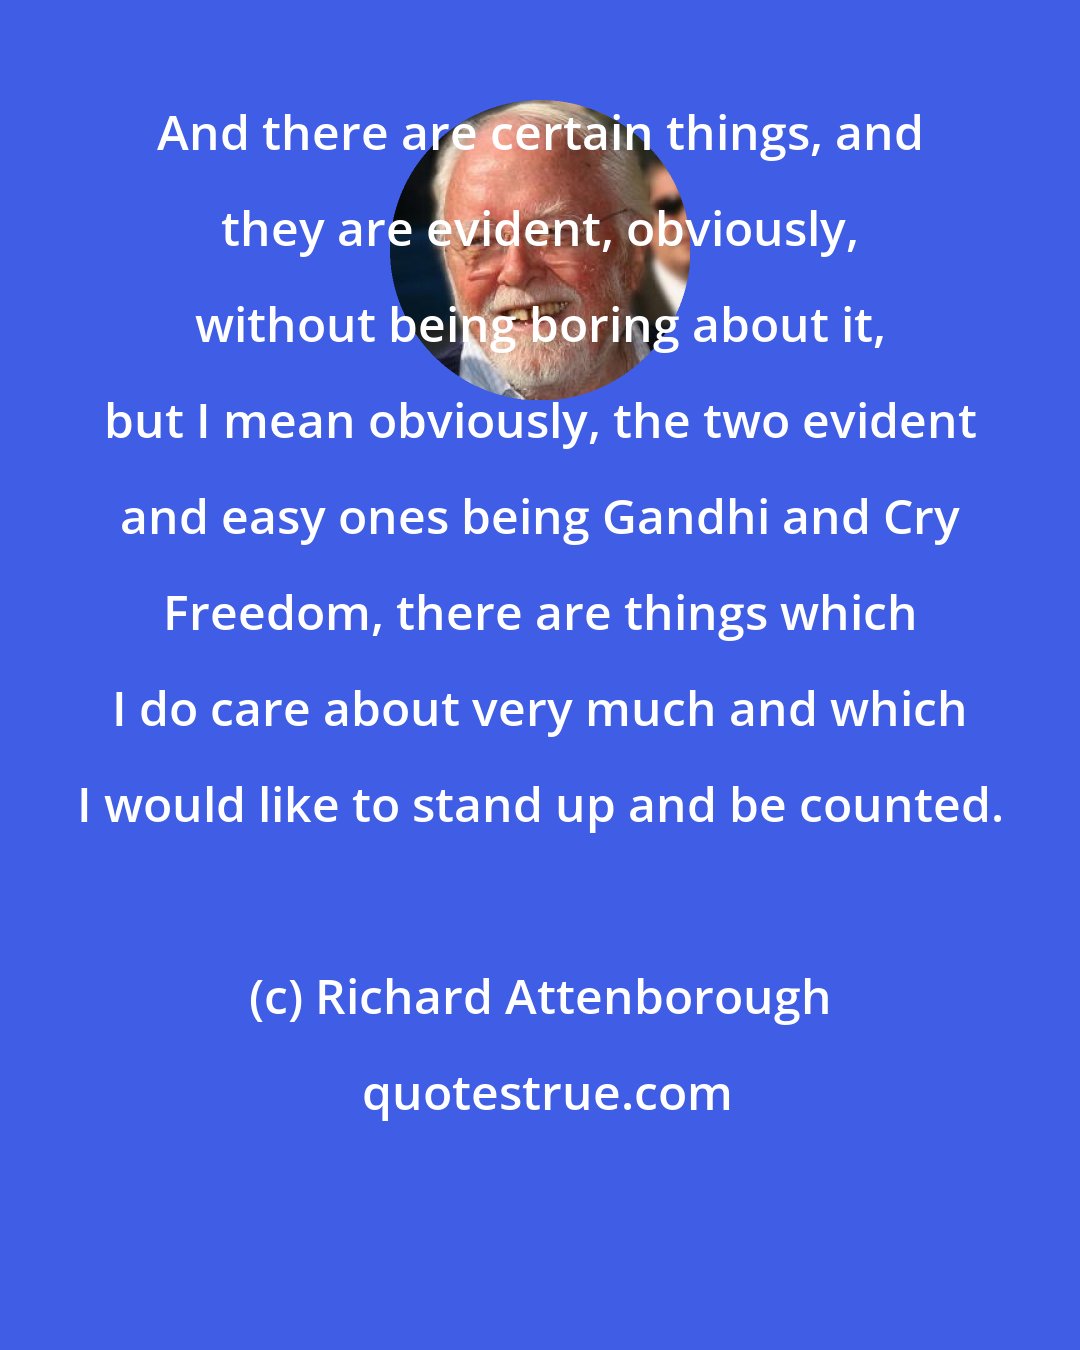 Richard Attenborough: And there are certain things, and they are evident, obviously, without being boring about it, but I mean obviously, the two evident and easy ones being Gandhi and Cry Freedom, there are things which I do care about very much and which I would like to stand up and be counted.